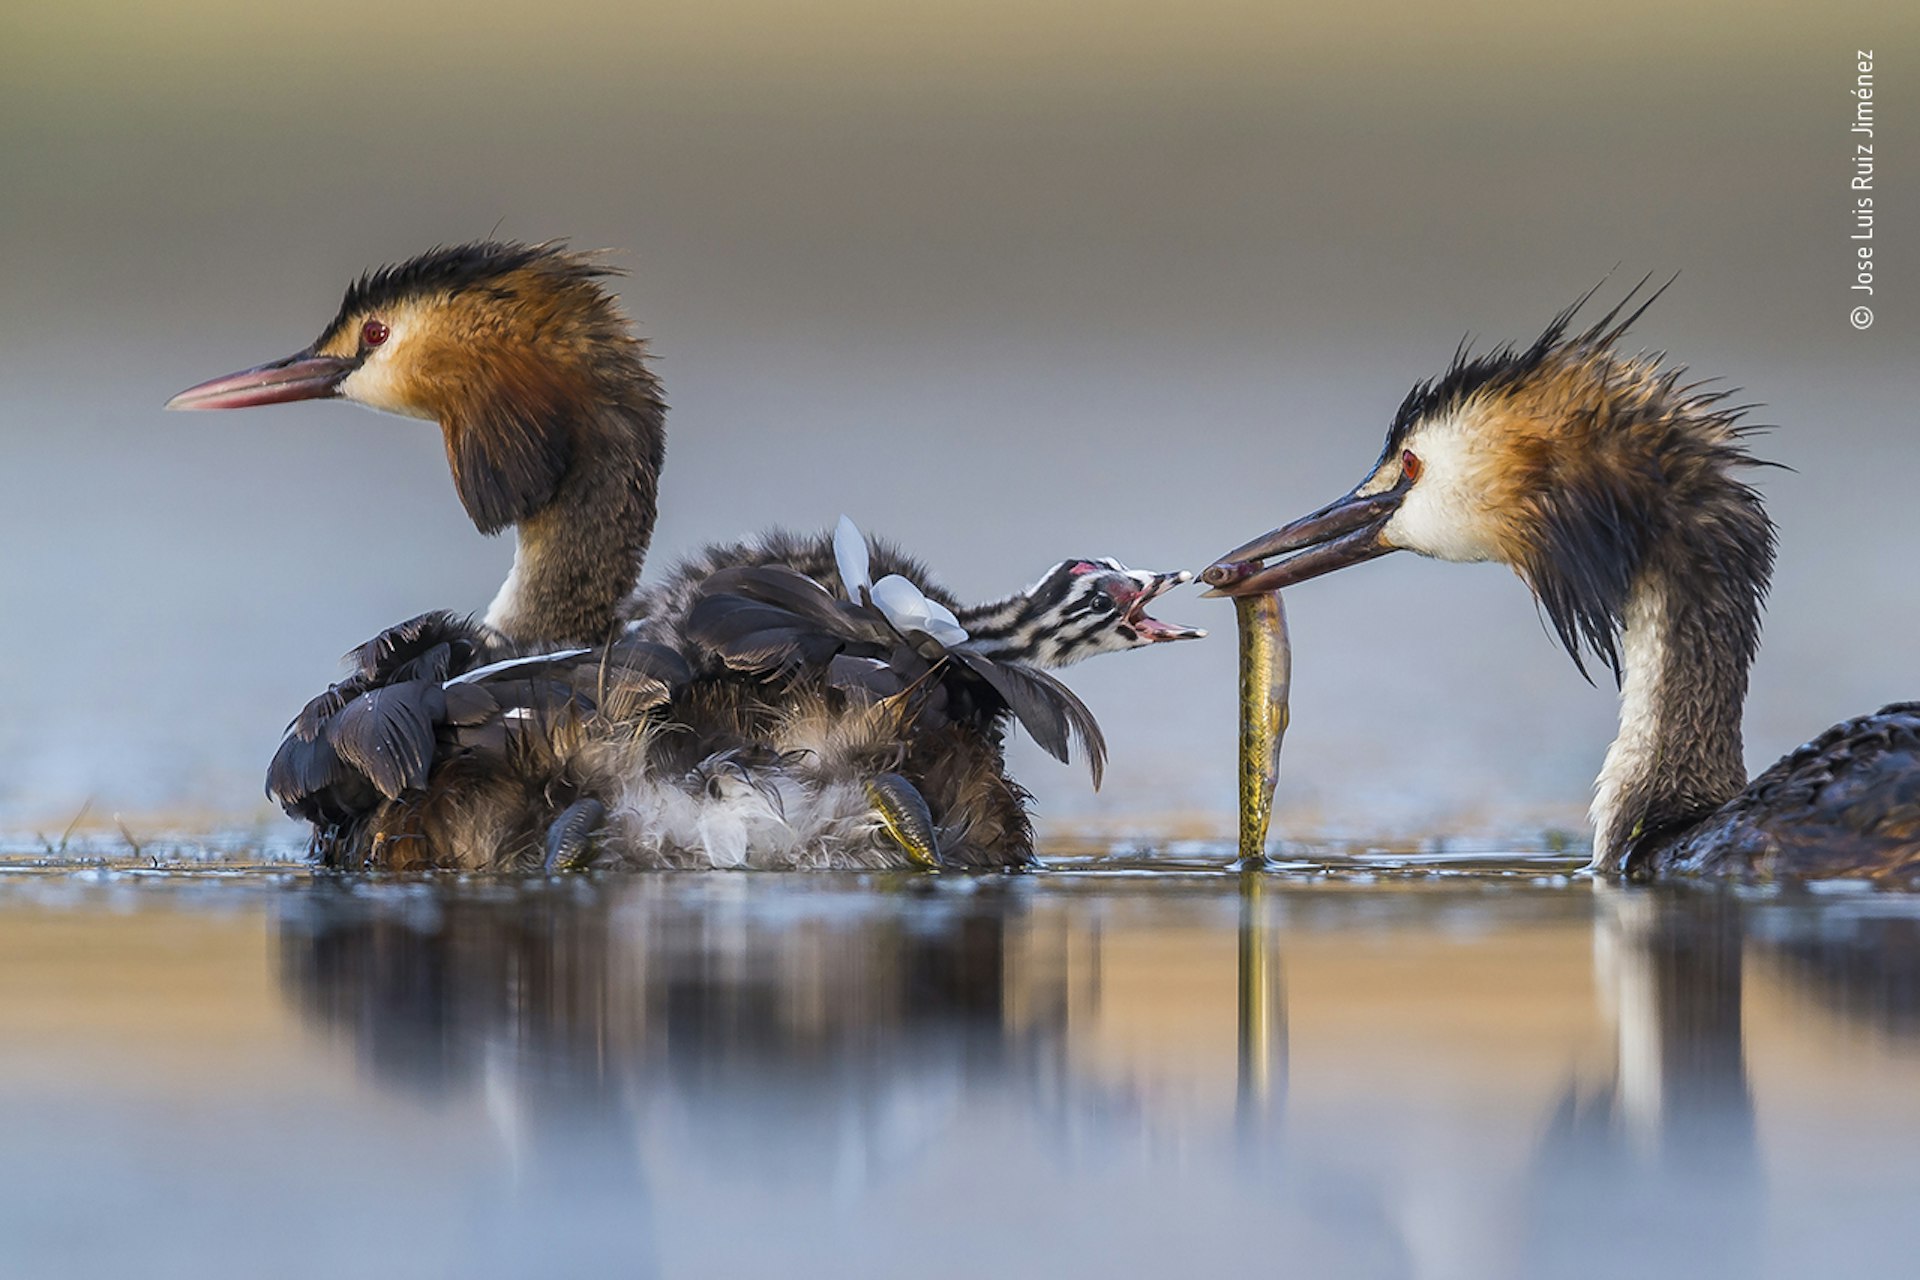 A great crested glebe feeding fish to its chick, riding on the back of its other parent